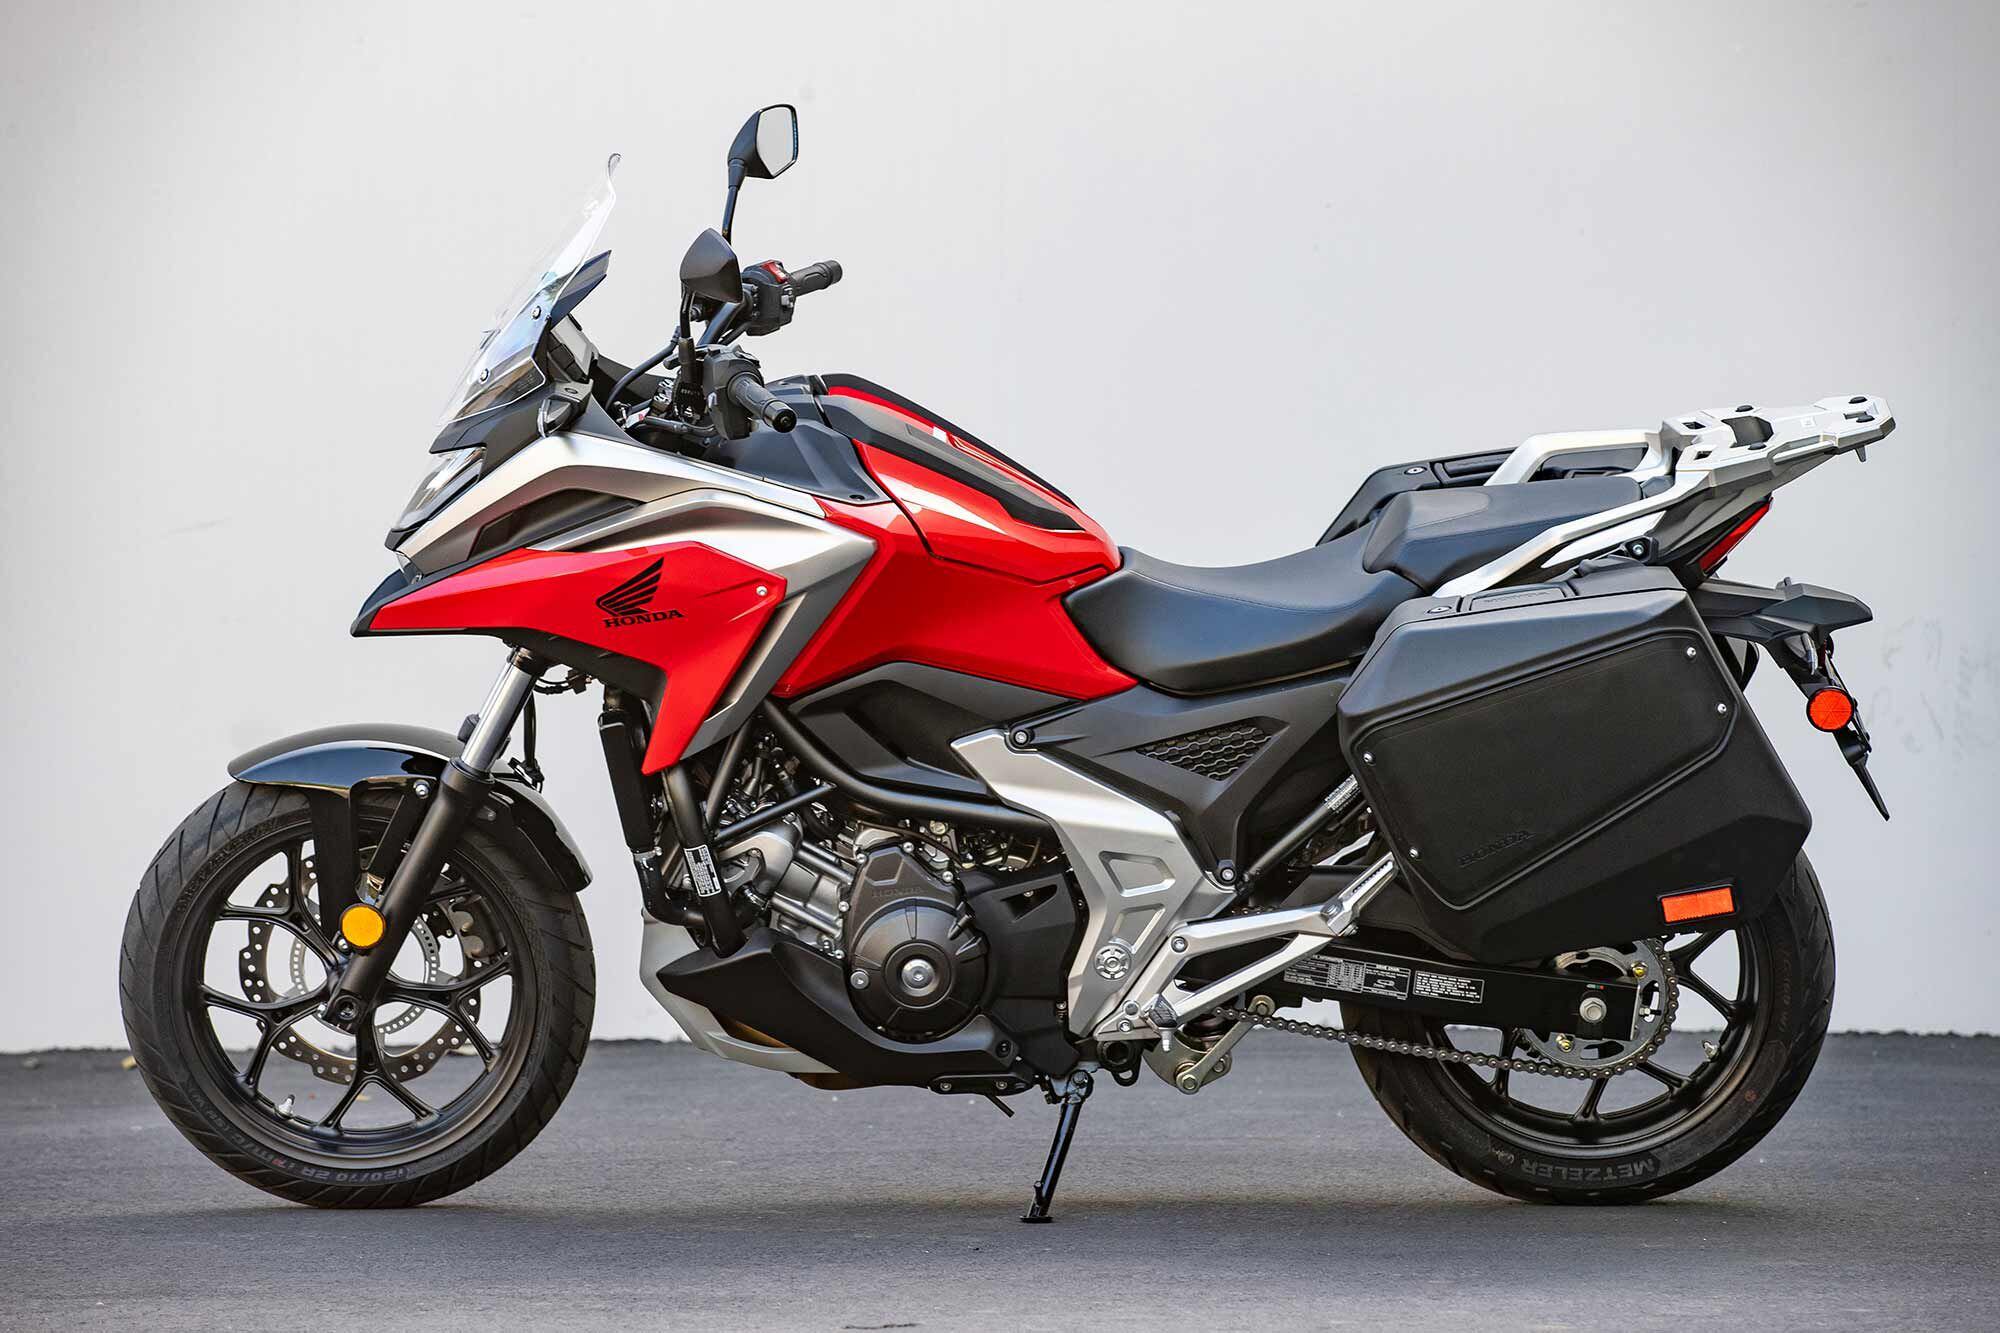 The 2021 Honda NC750X DCT is available for $9,299, proving as a remarkable in-class value.